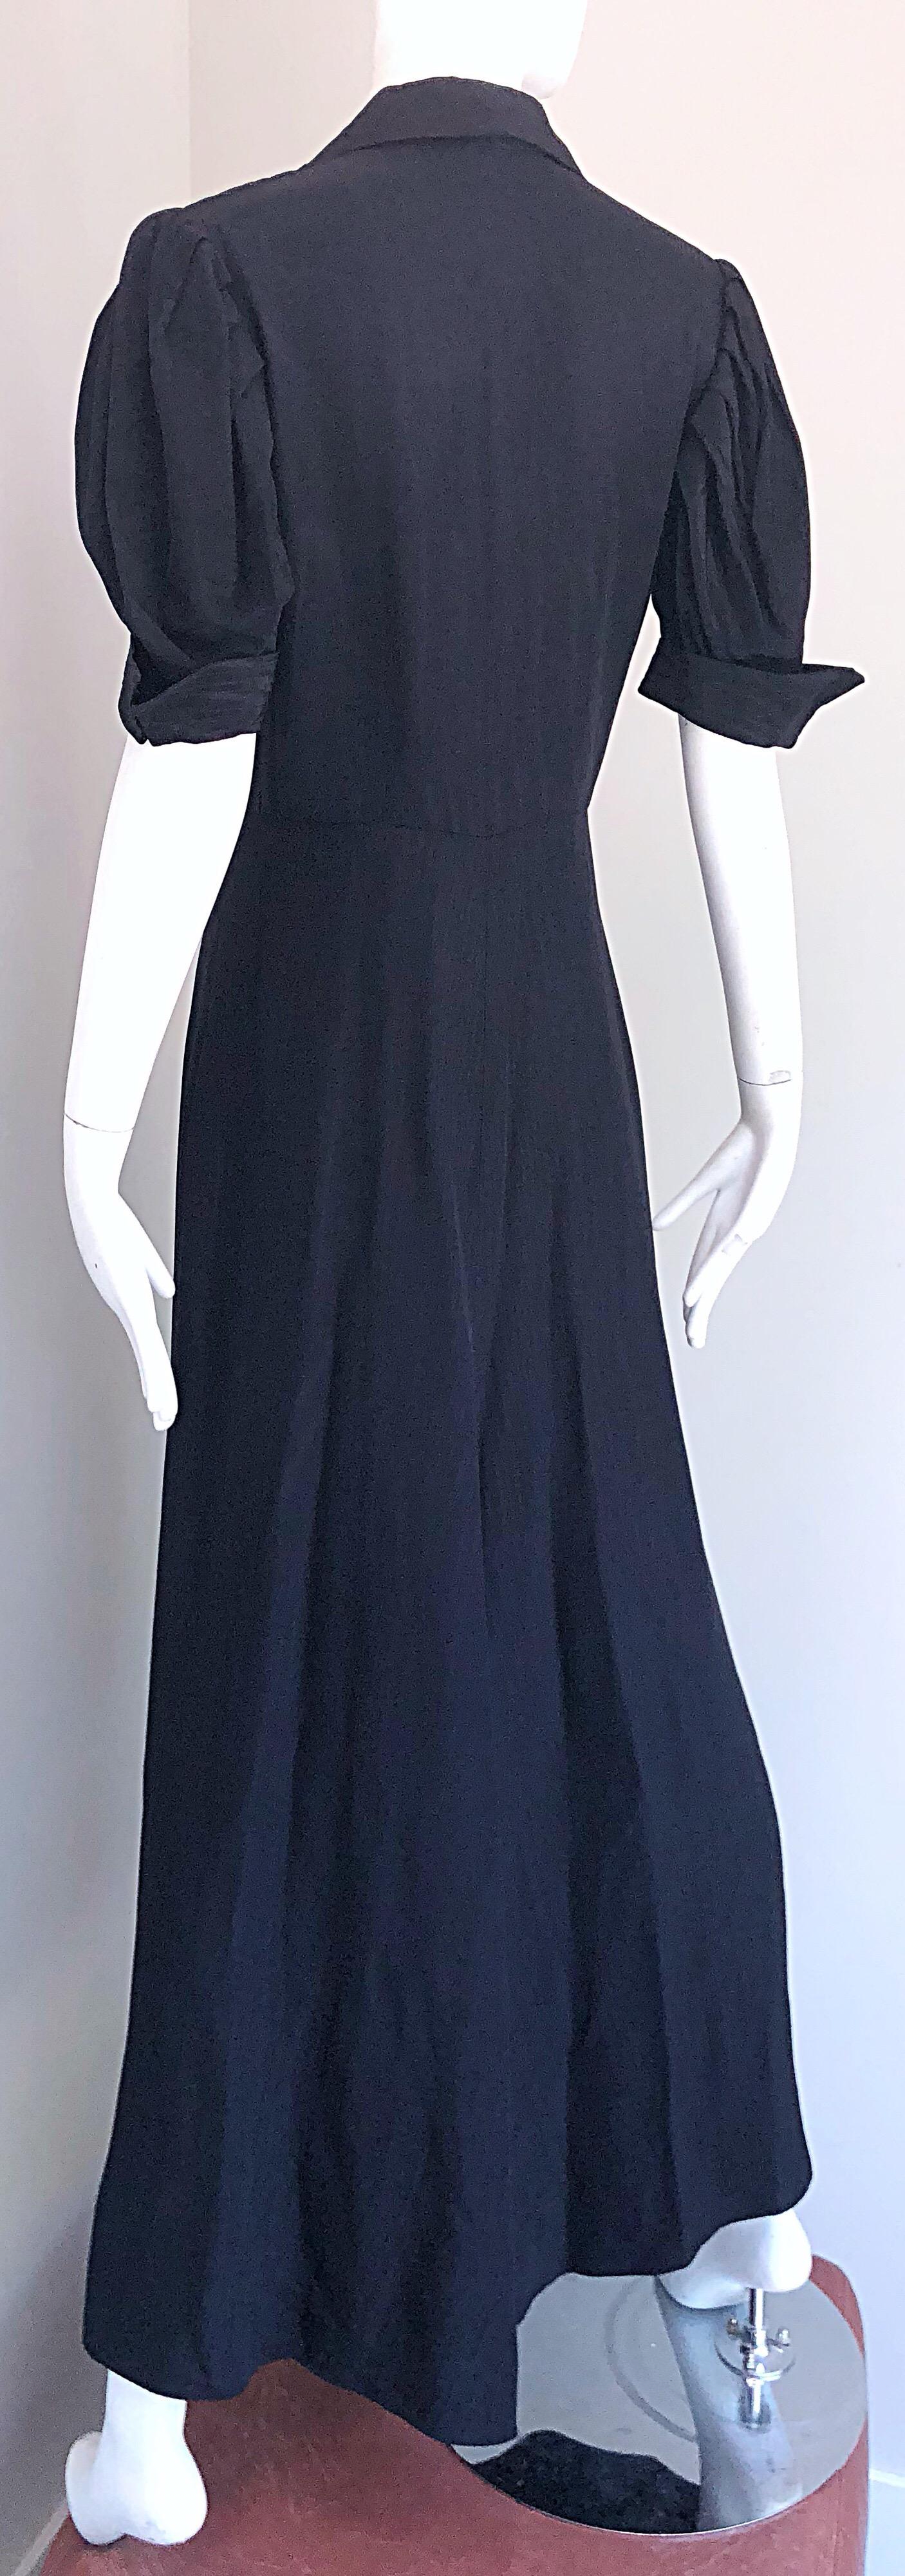 1940s Demi Couture Black Silk Moire Short Sleeve Vintage 40s Evening Gown Dress For Sale 2